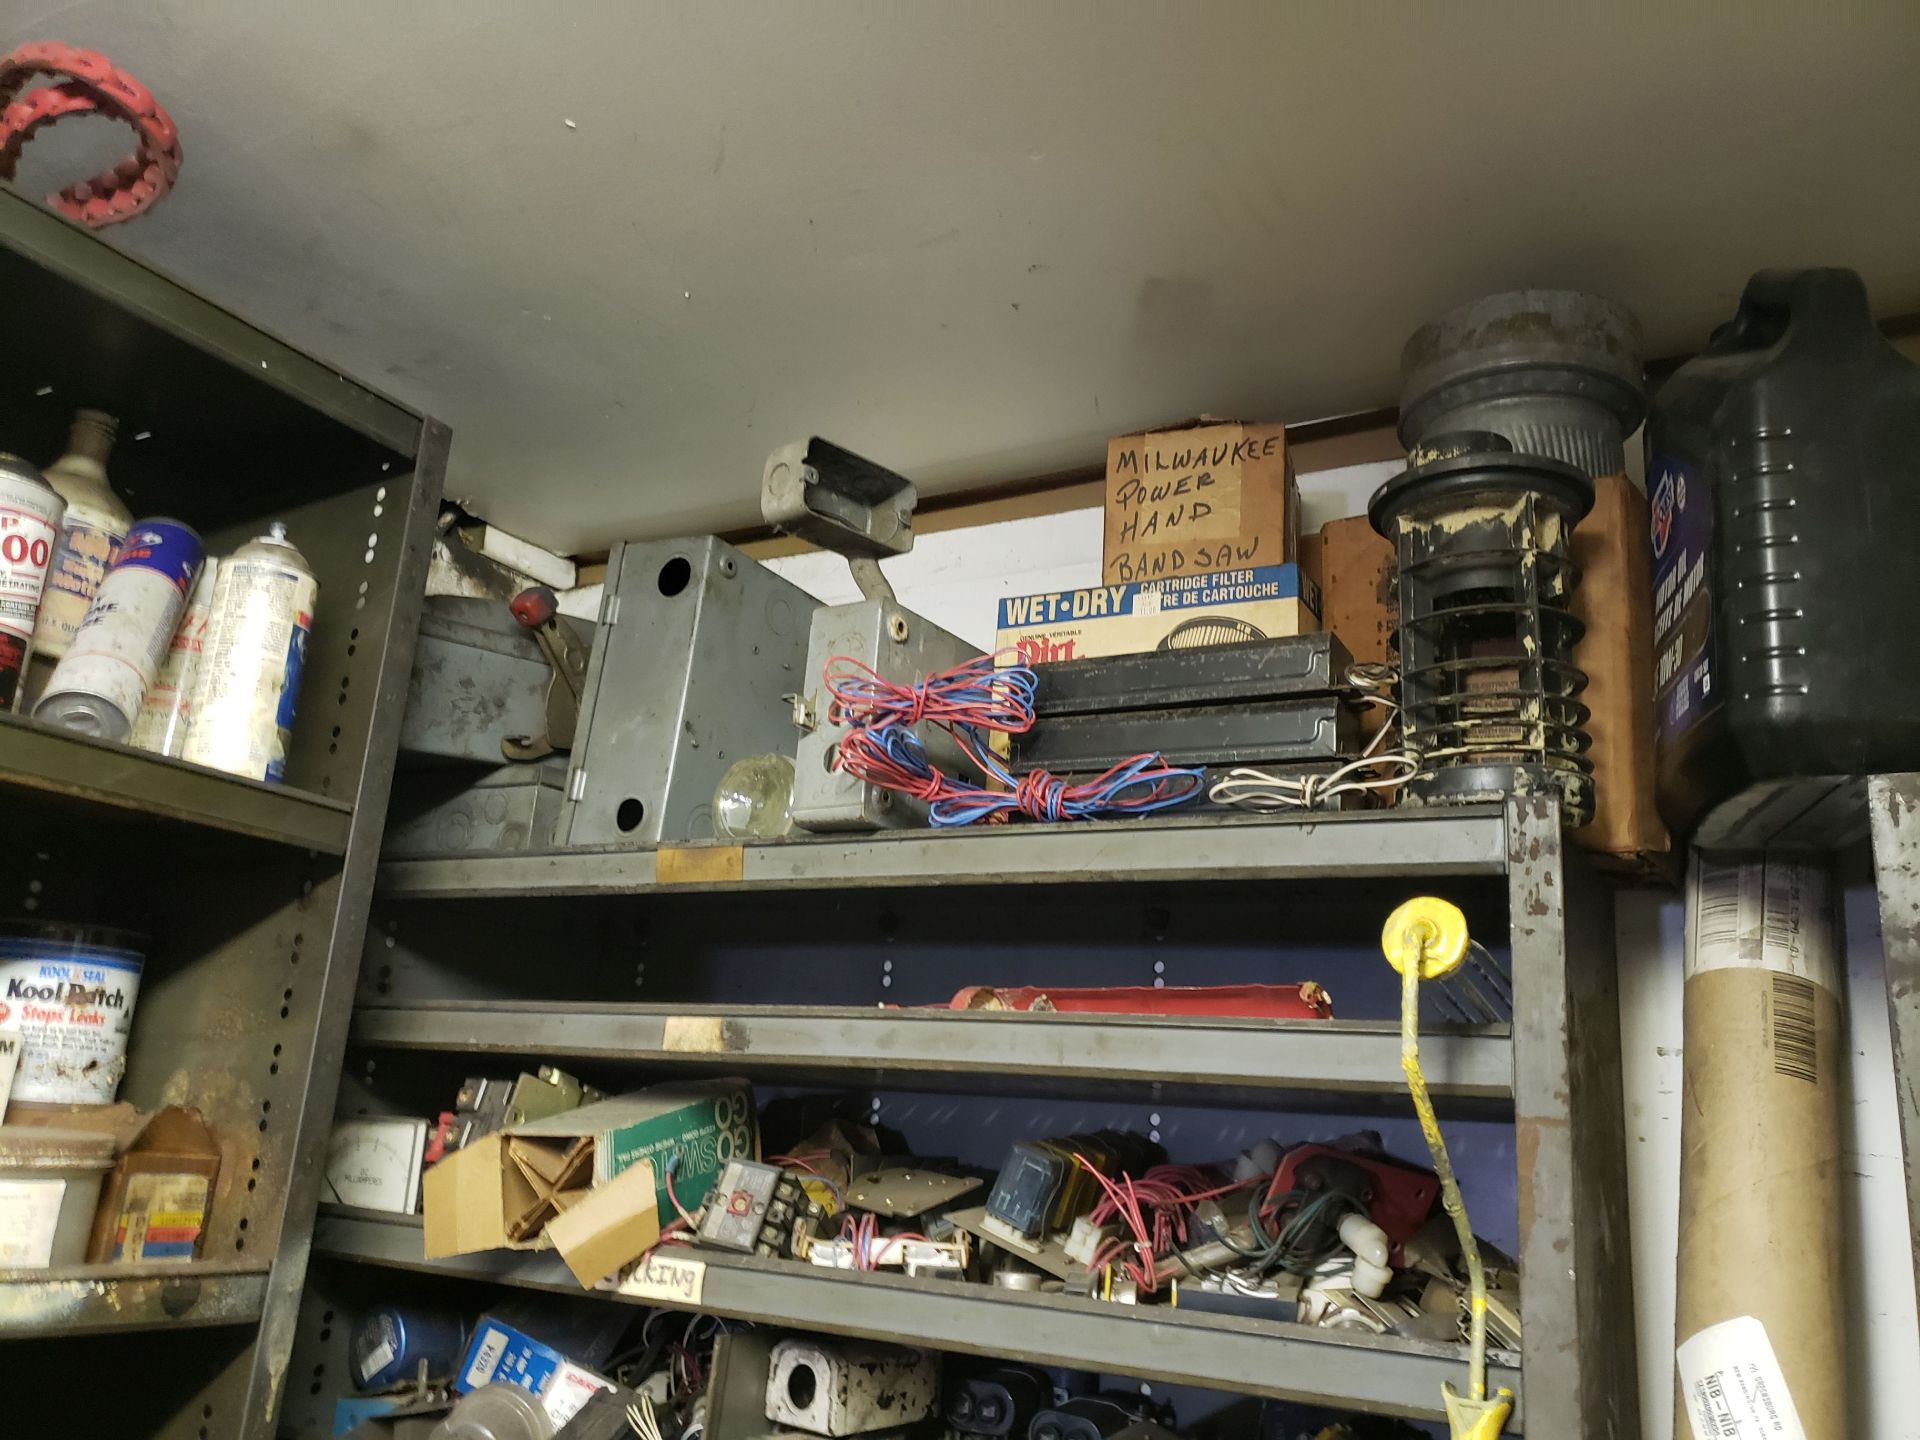 BALANCE OF CONTENTS OF MAINTENANCE ROOM 9 SHELVES & CONTENTS - FASTENERS, ELECTRICAL, FITTINGS, - Bild 7 aus 10